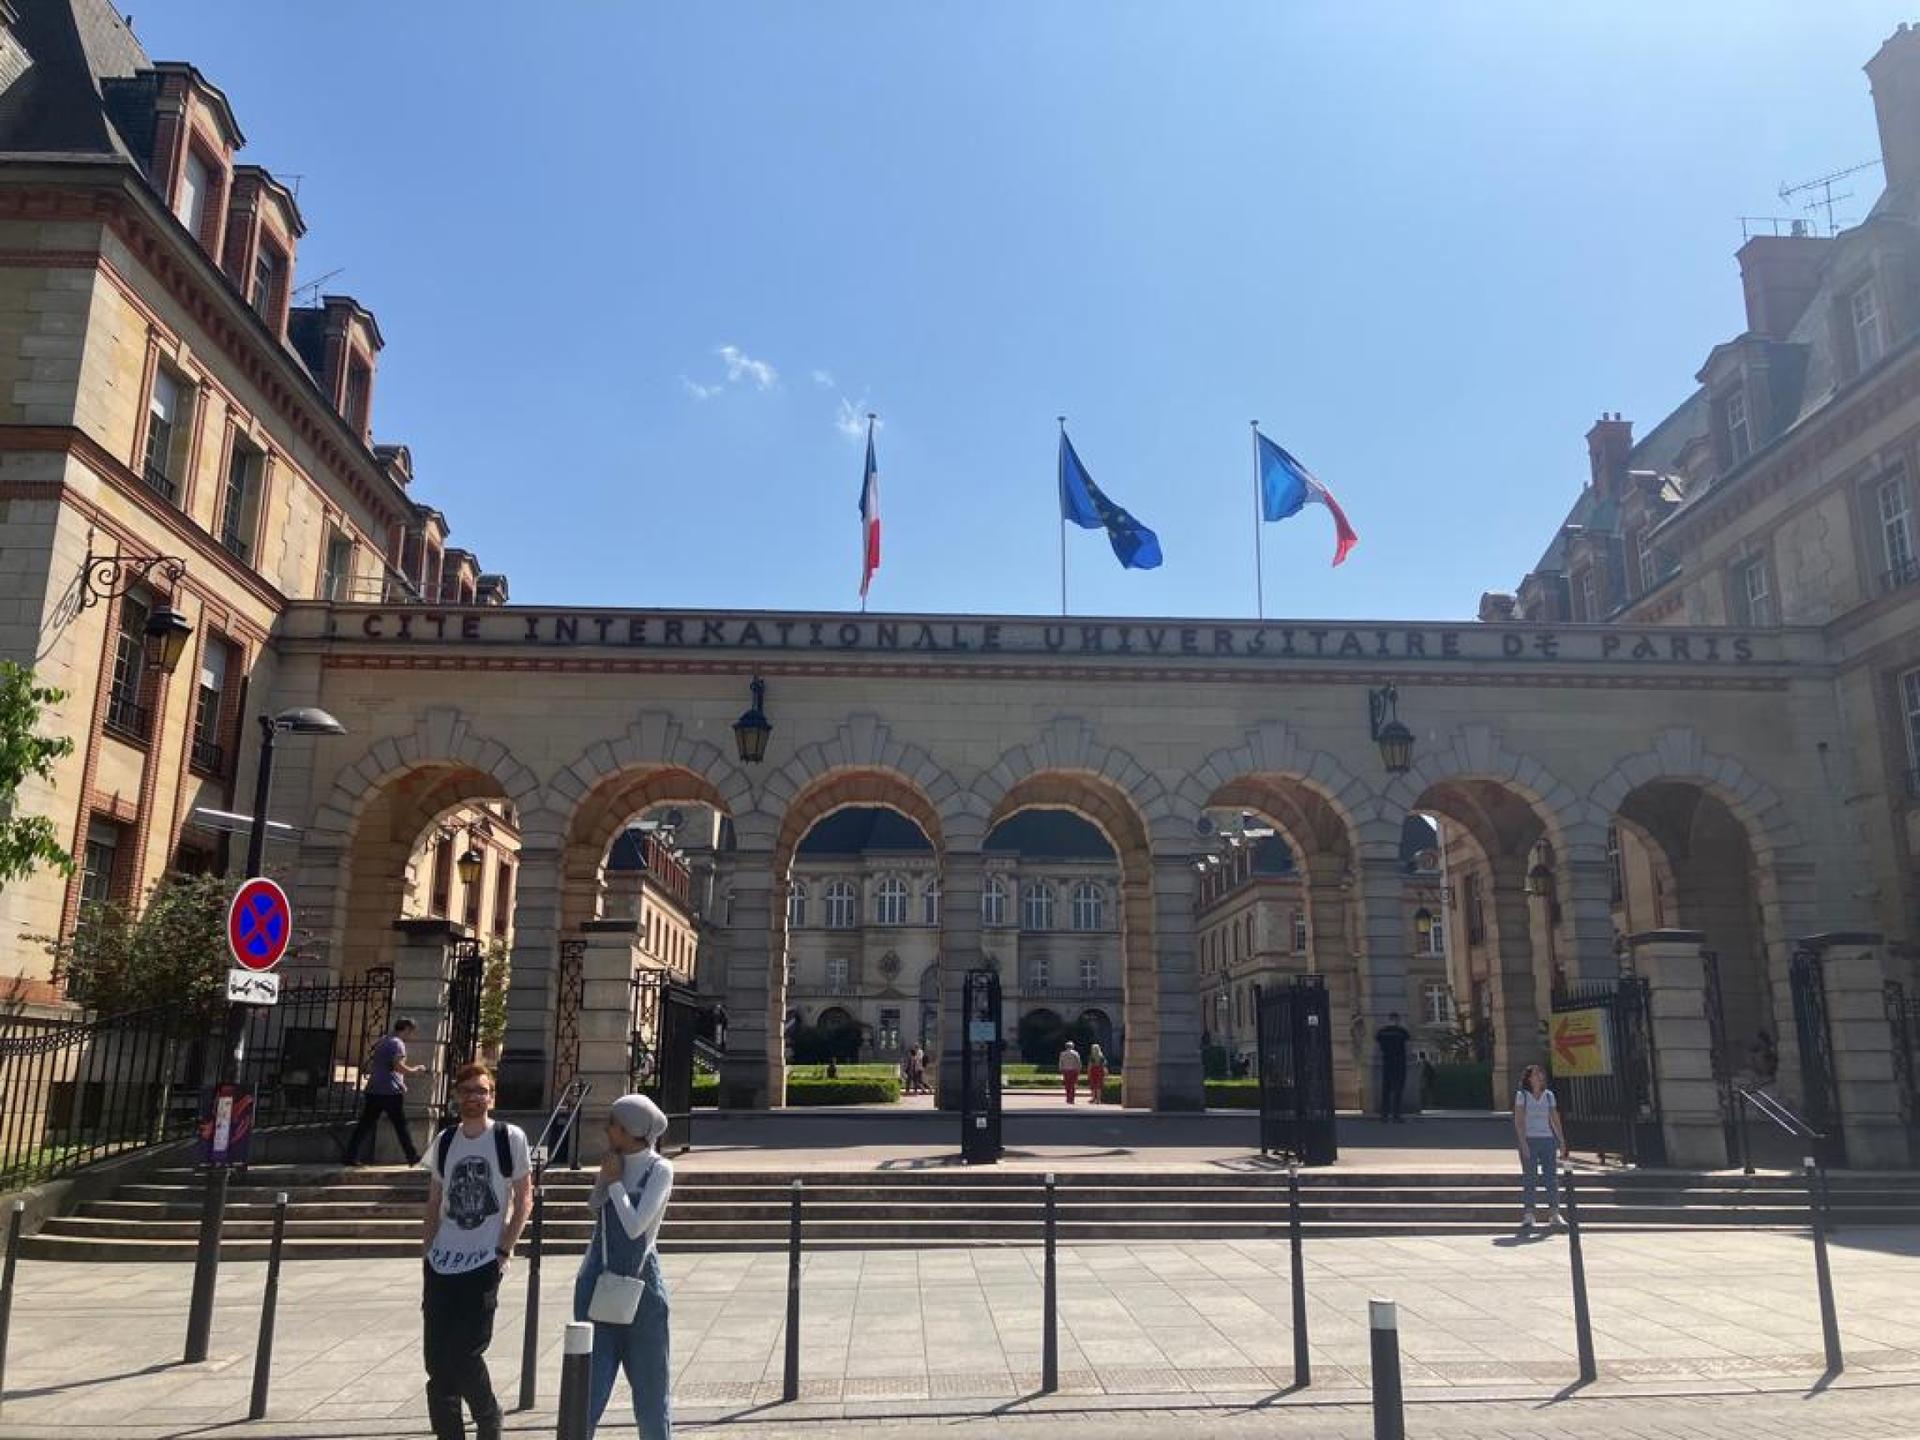 Exchange programs allow students to move freely between universities across the European Union, like Cité Internationale Universitaire, while paying local tuition prices.